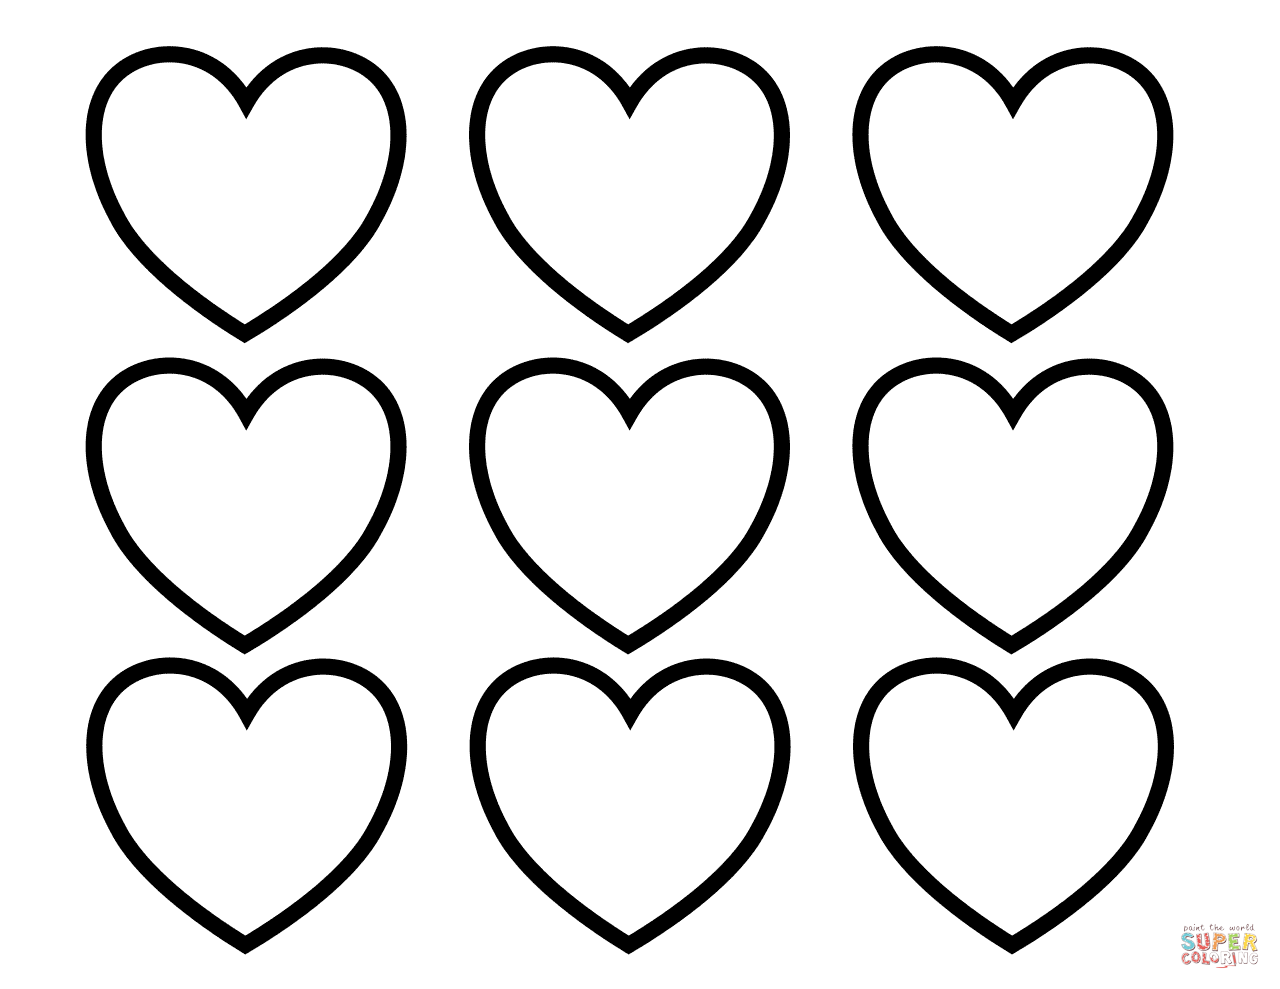 Valentines day blank hearts coloring page free printable coloring pages